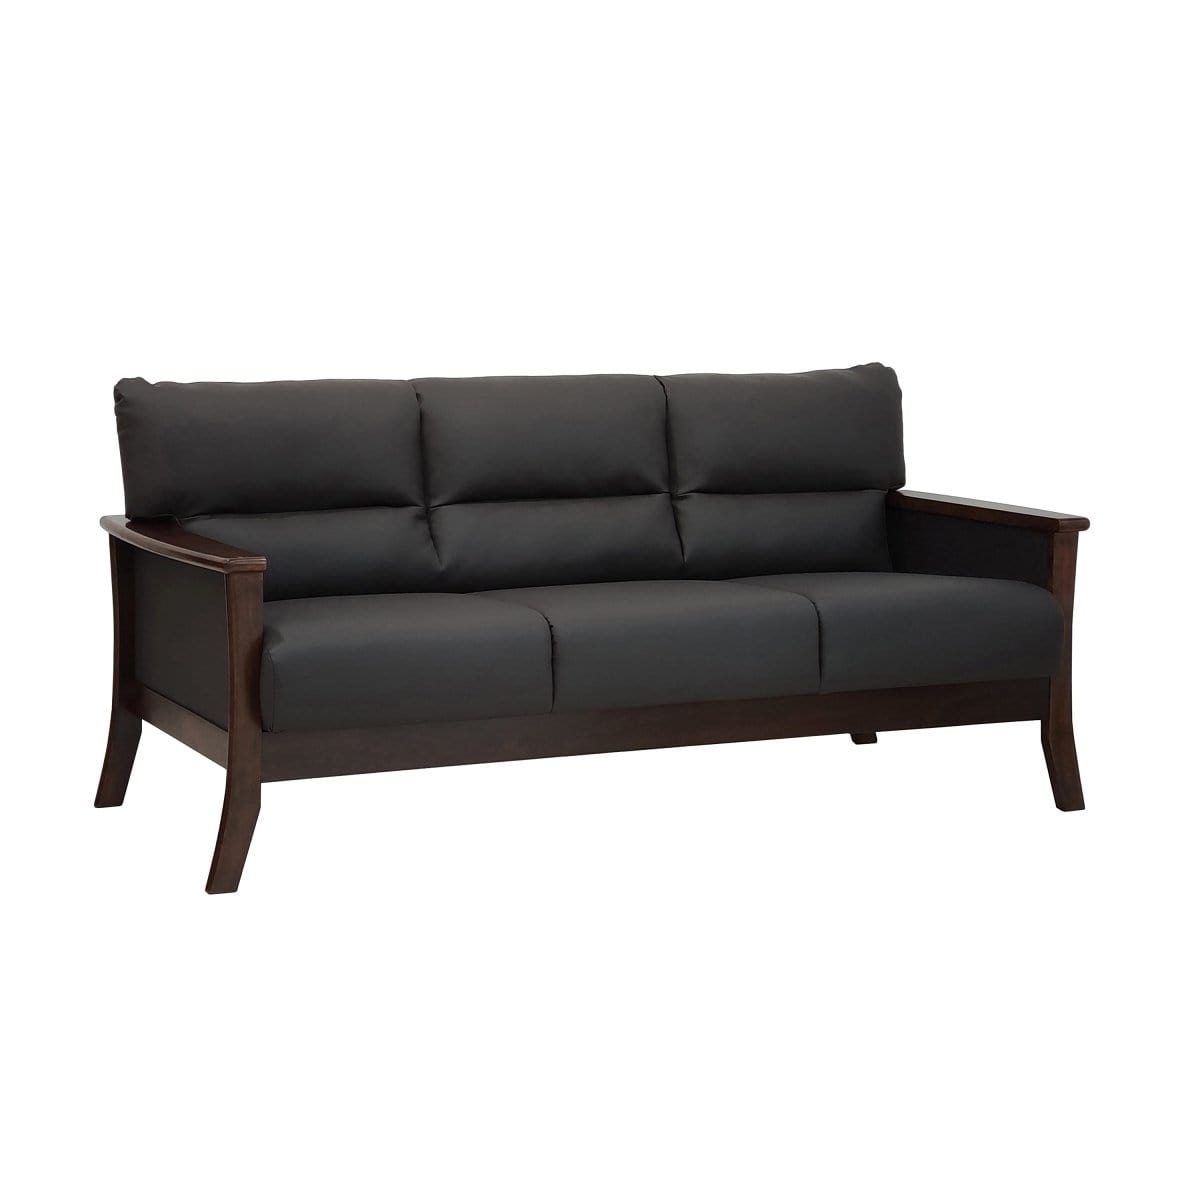 Davis 3-Seater Solid Wood Frame Leather-Upholstered Sofa picket and rail